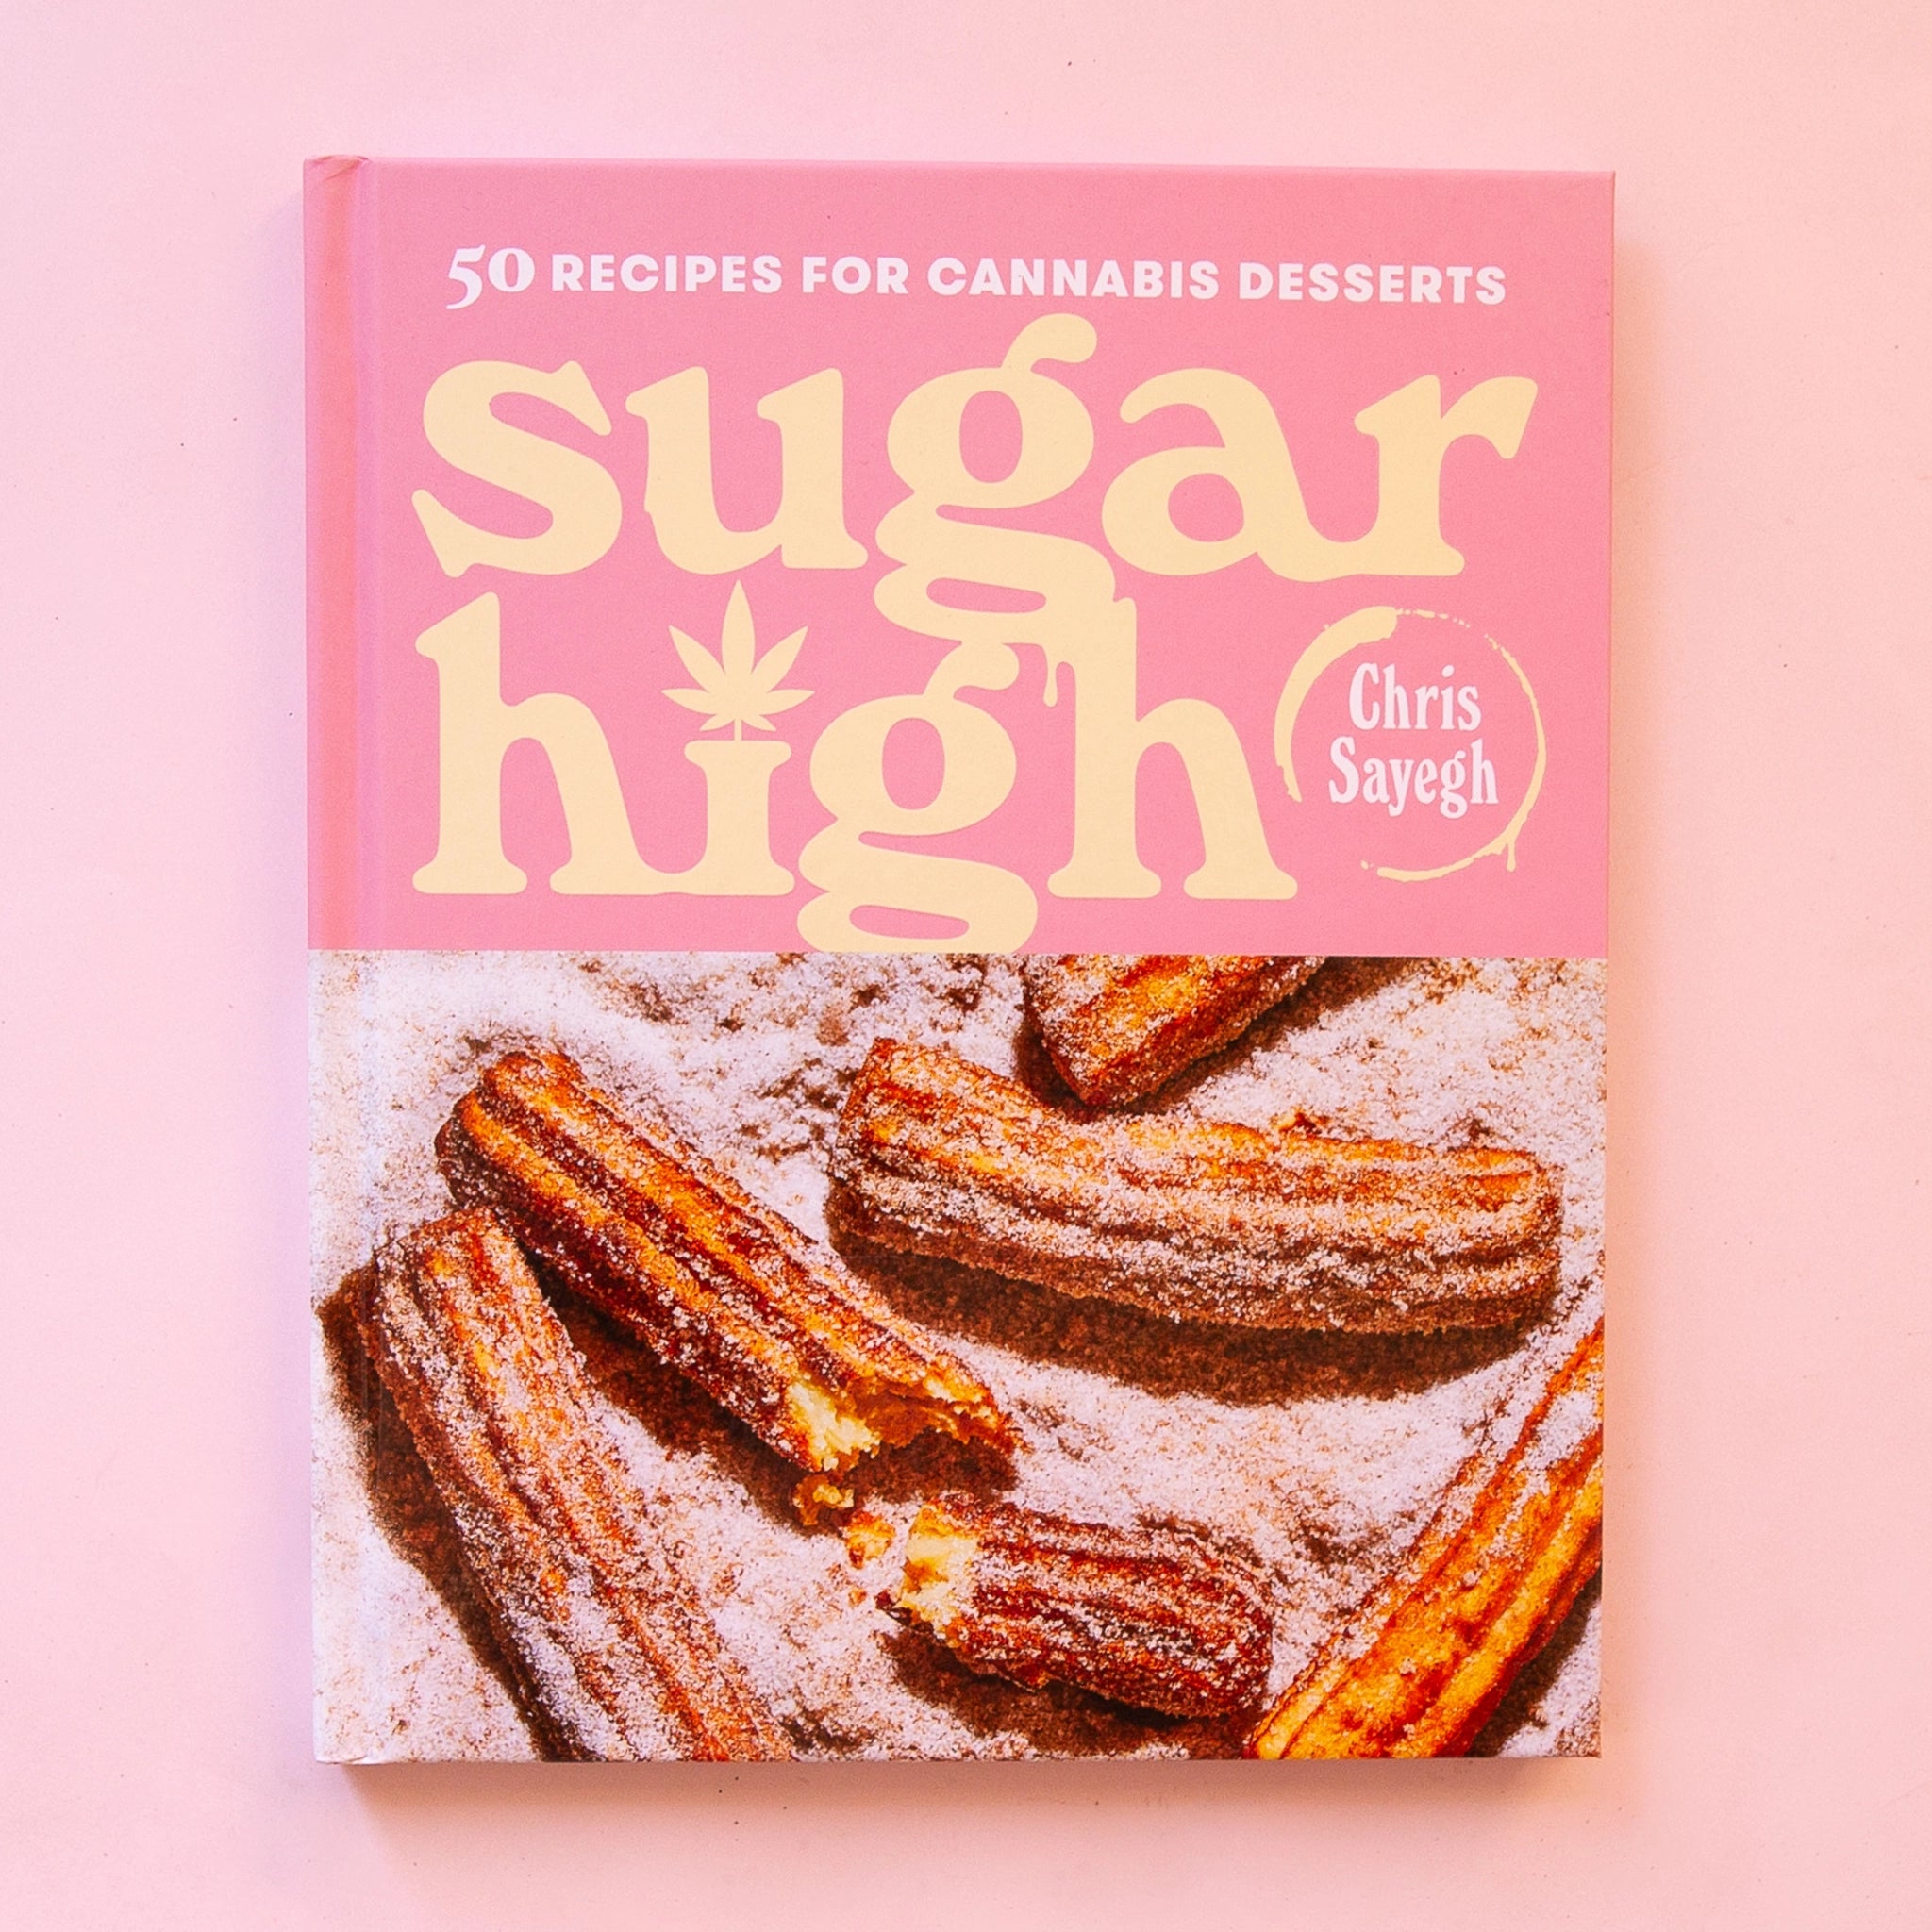 A pink book cover that reads, "50 Recipes for cannabis desserts Sugar High" along with the bottom half that features a photo of sugar churro.